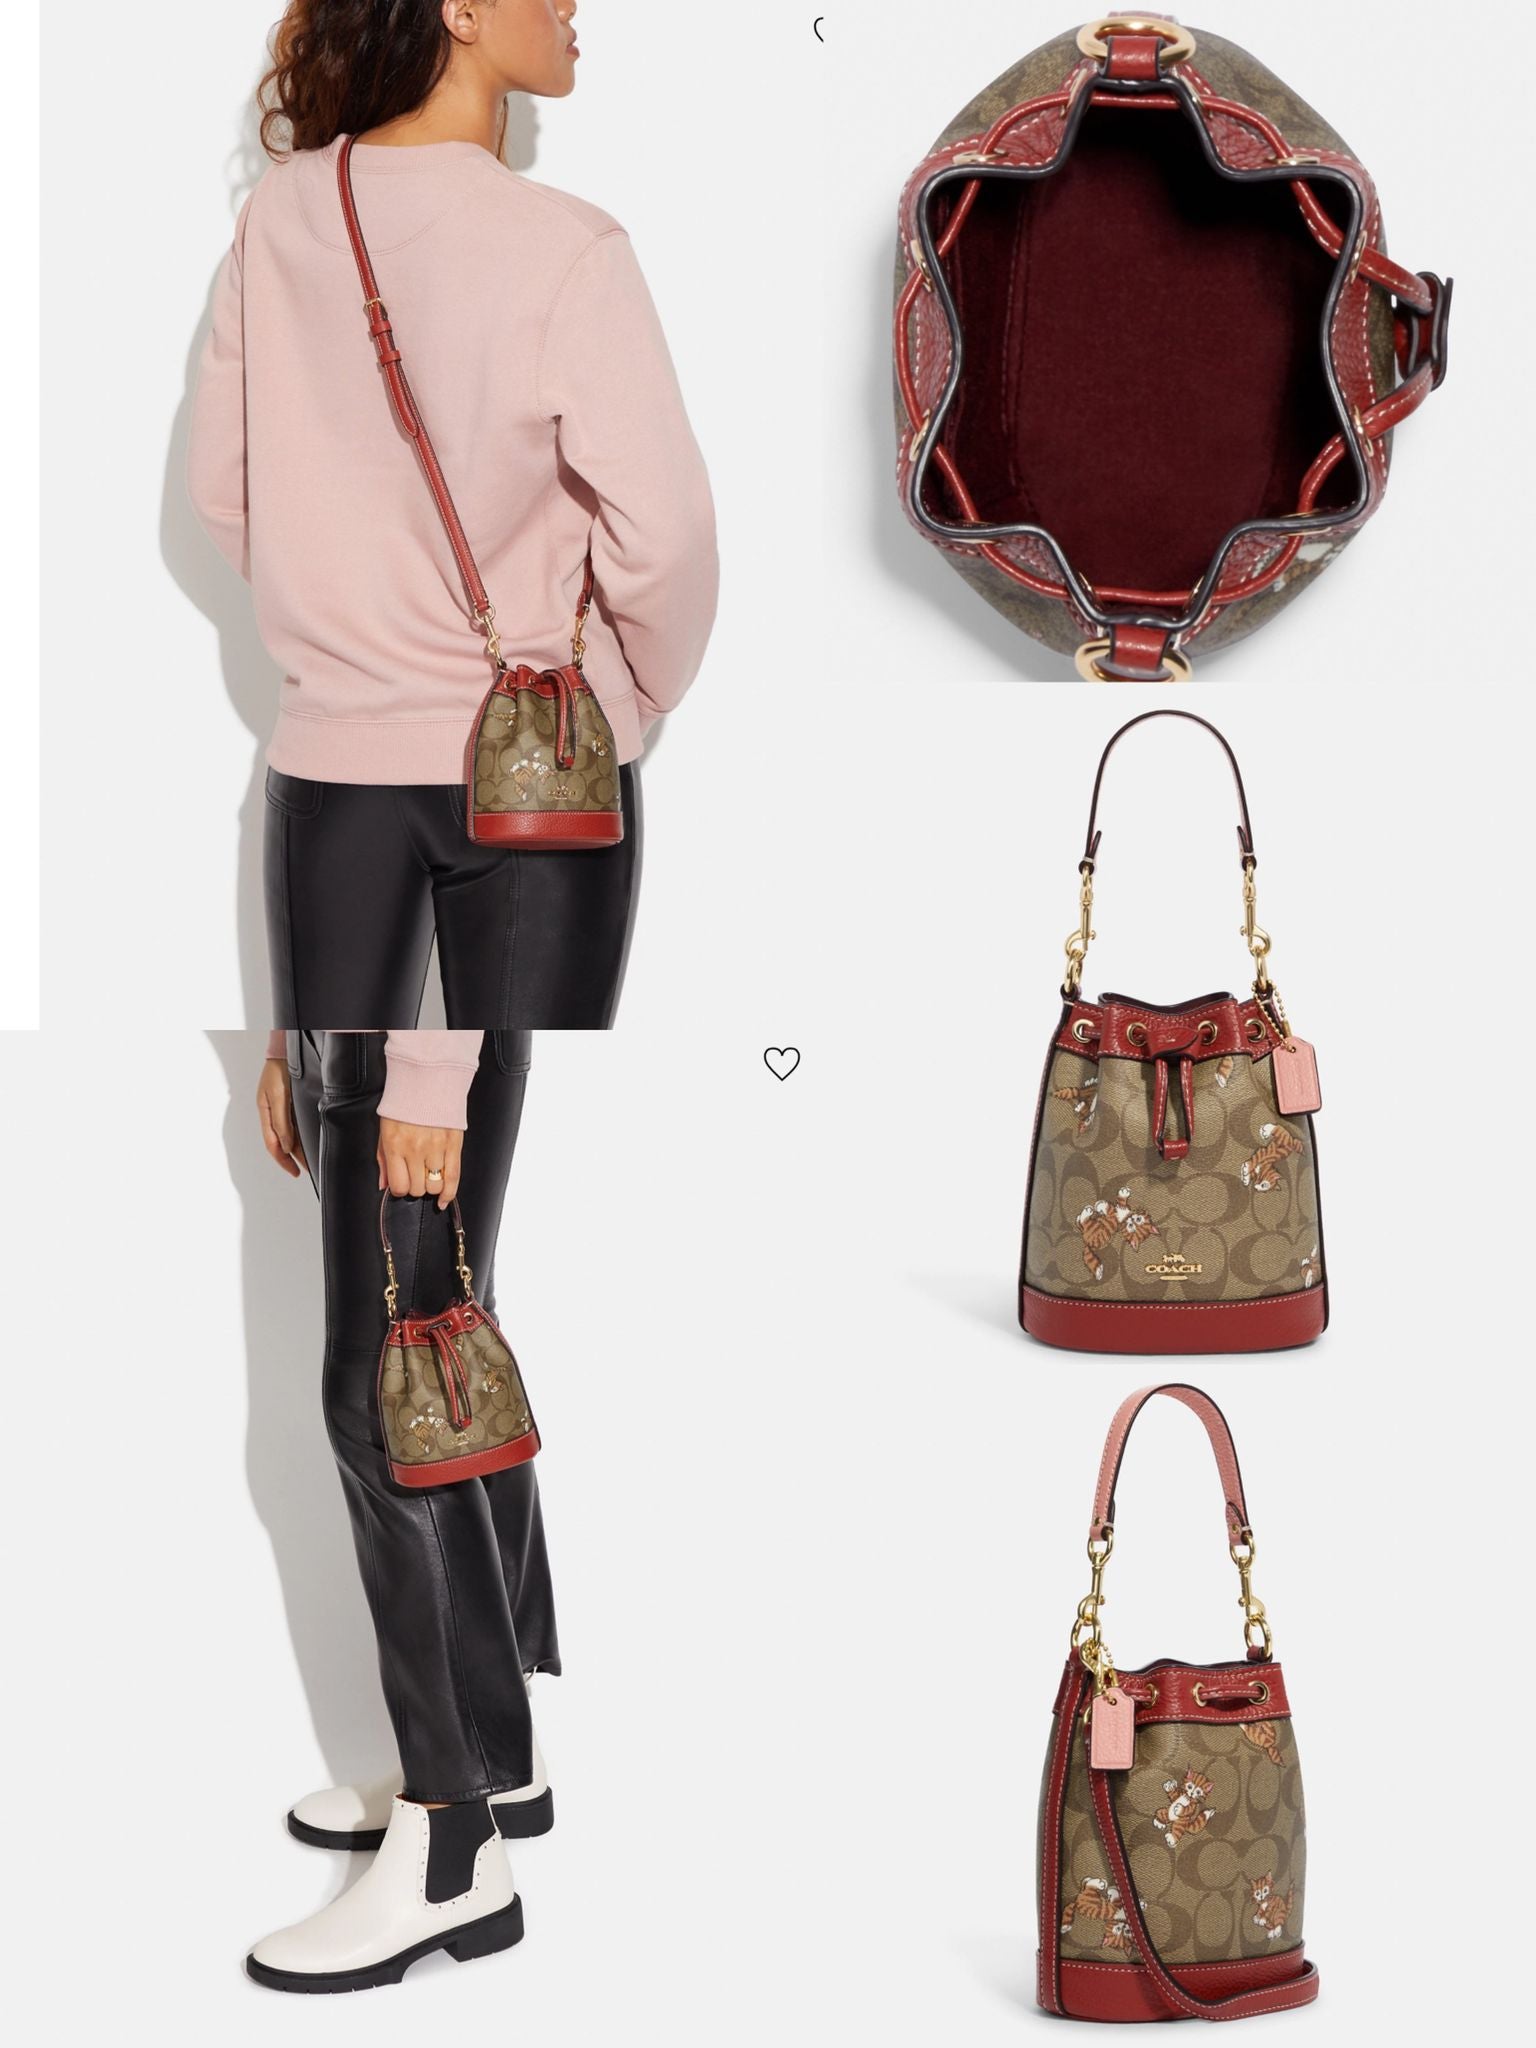 Coach Bags | Coach Mini Dempsey Bucket Bag in Signature Canvas with Dancing Kitten Print | Color: Red | Size: Os | Kenshin514's Closet